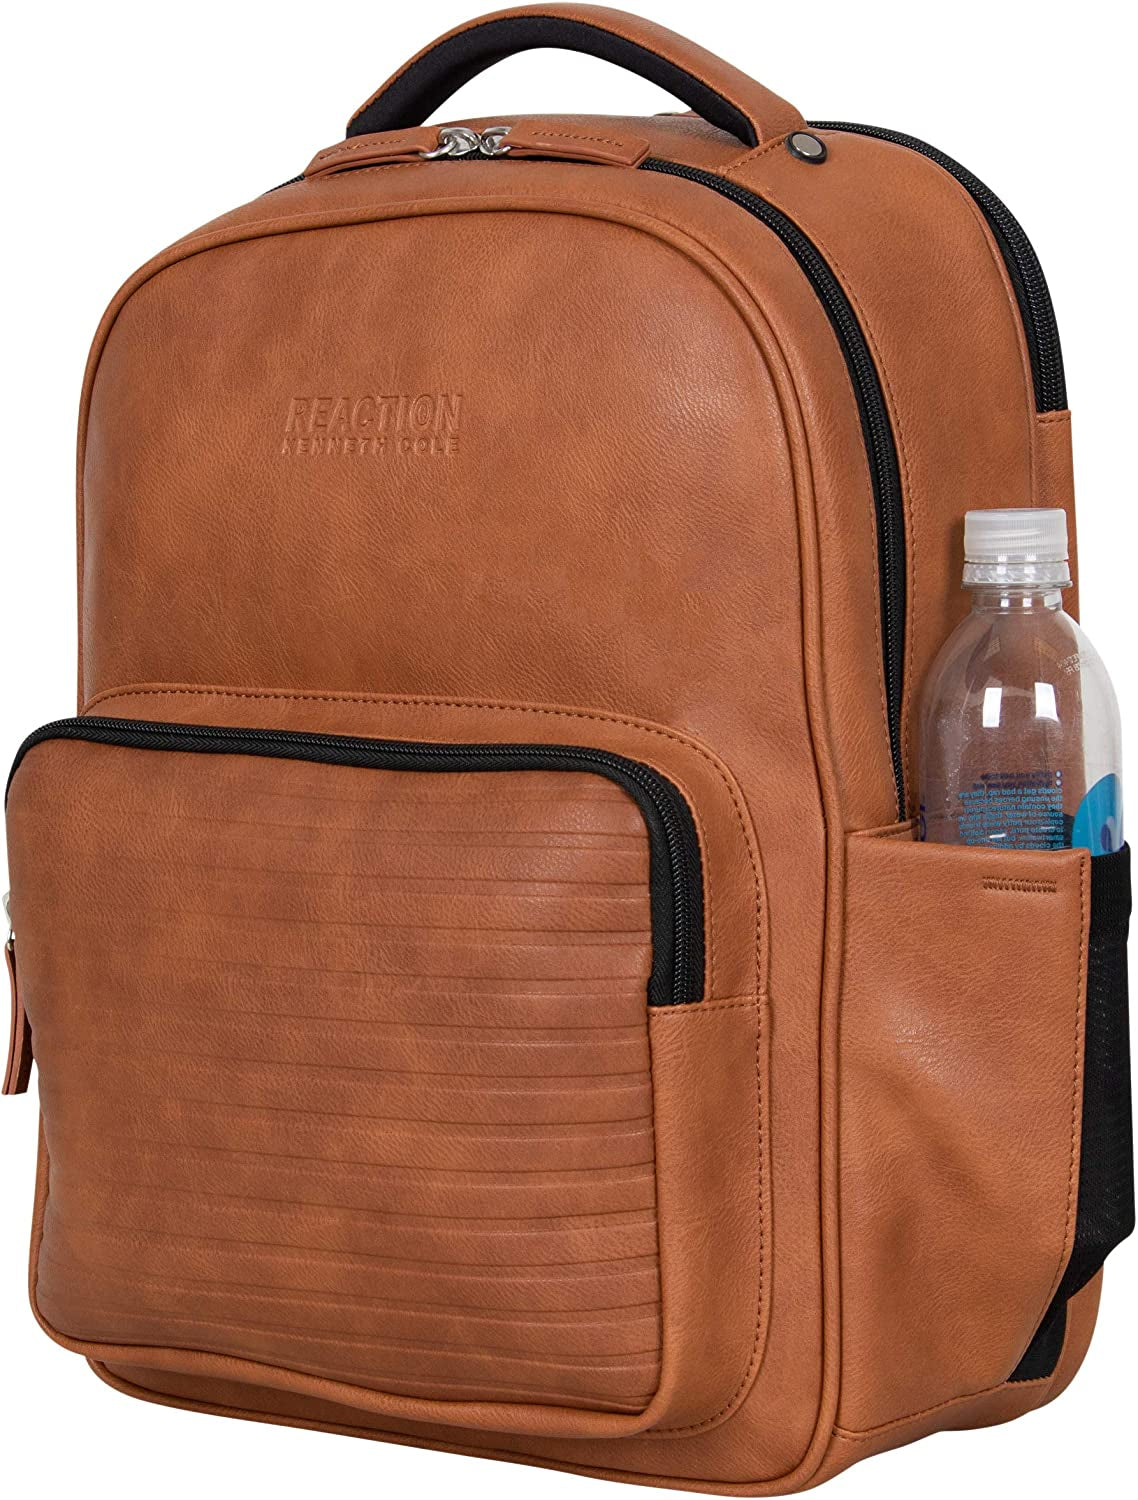 Professional Title: "Premium Vegan Leather Tablet Bookbag with Anti-Theft RFID, Ideal for Work and Travel, Cognac, 15.6" Laptop Backpack"